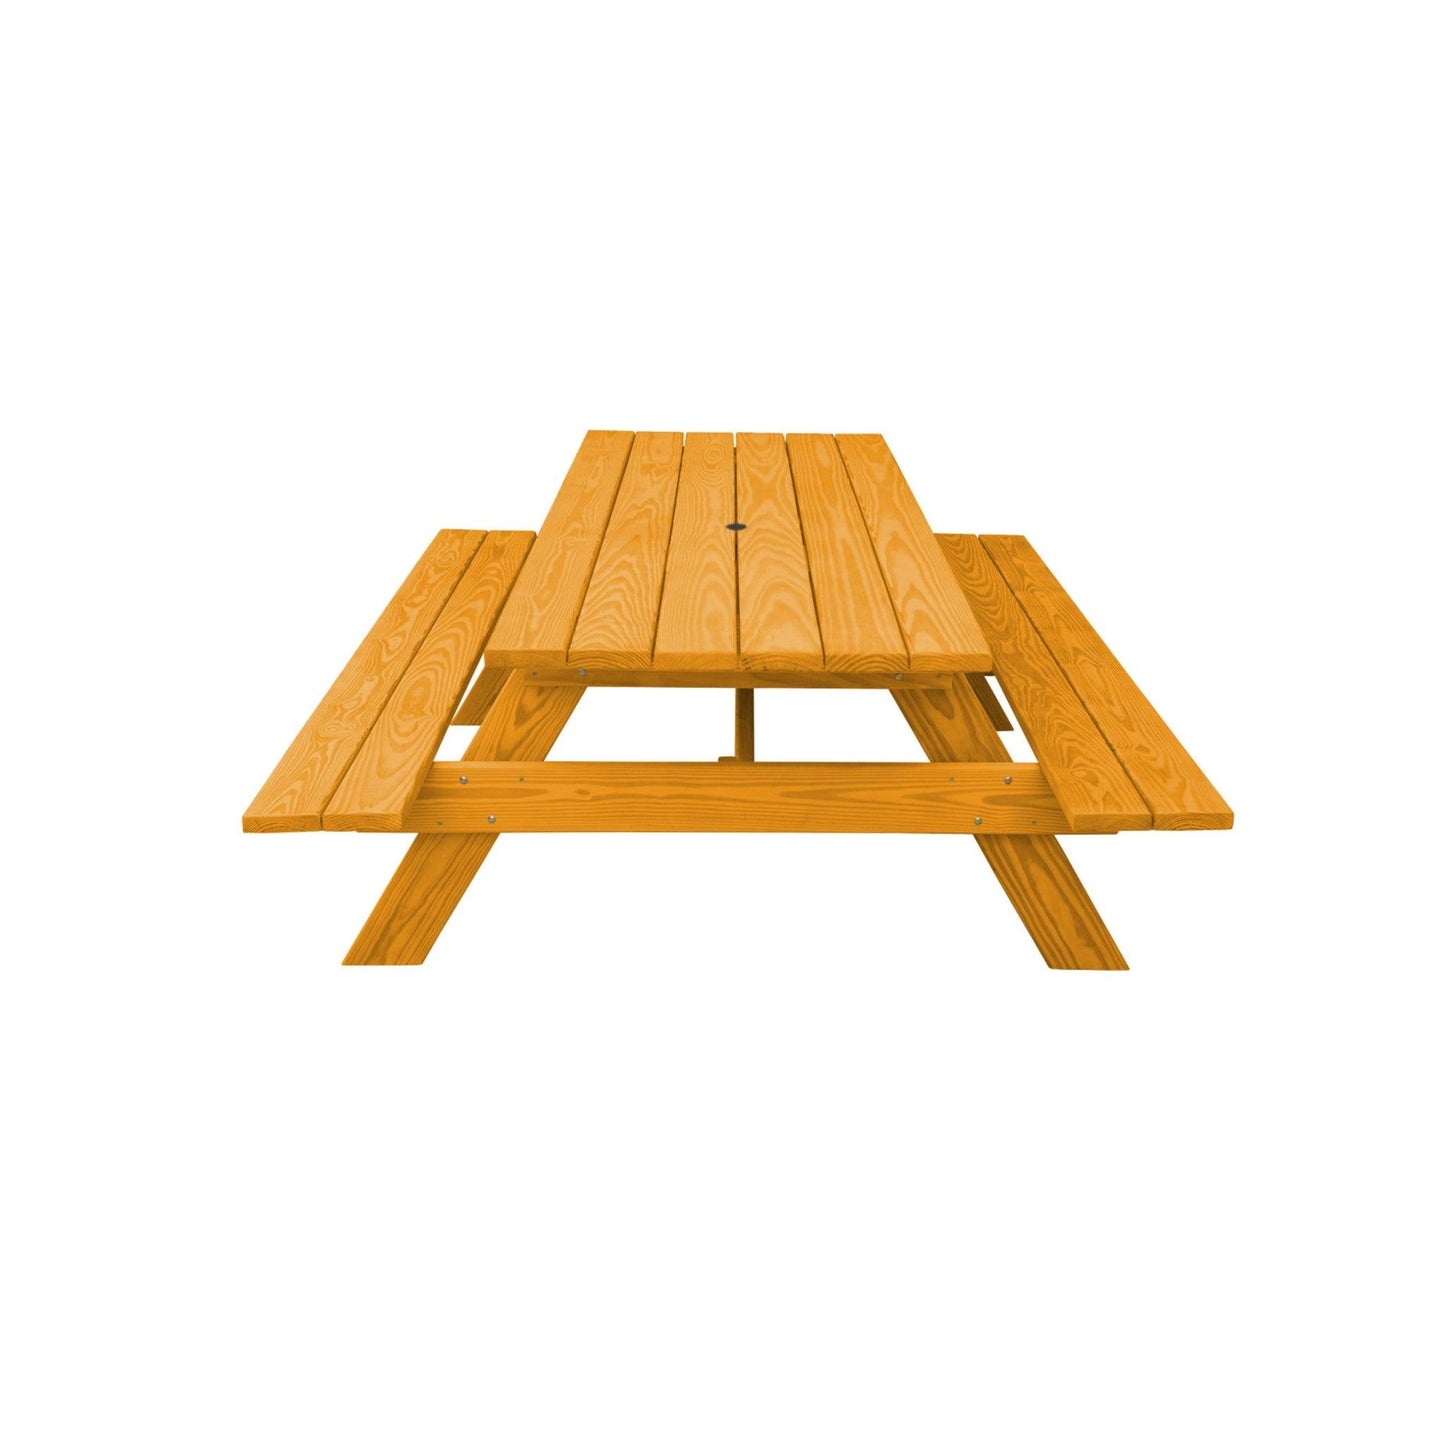 94" Natural Solid Wood Outdoor Picnic Table with Umbrella Hole - FurniFindUSA